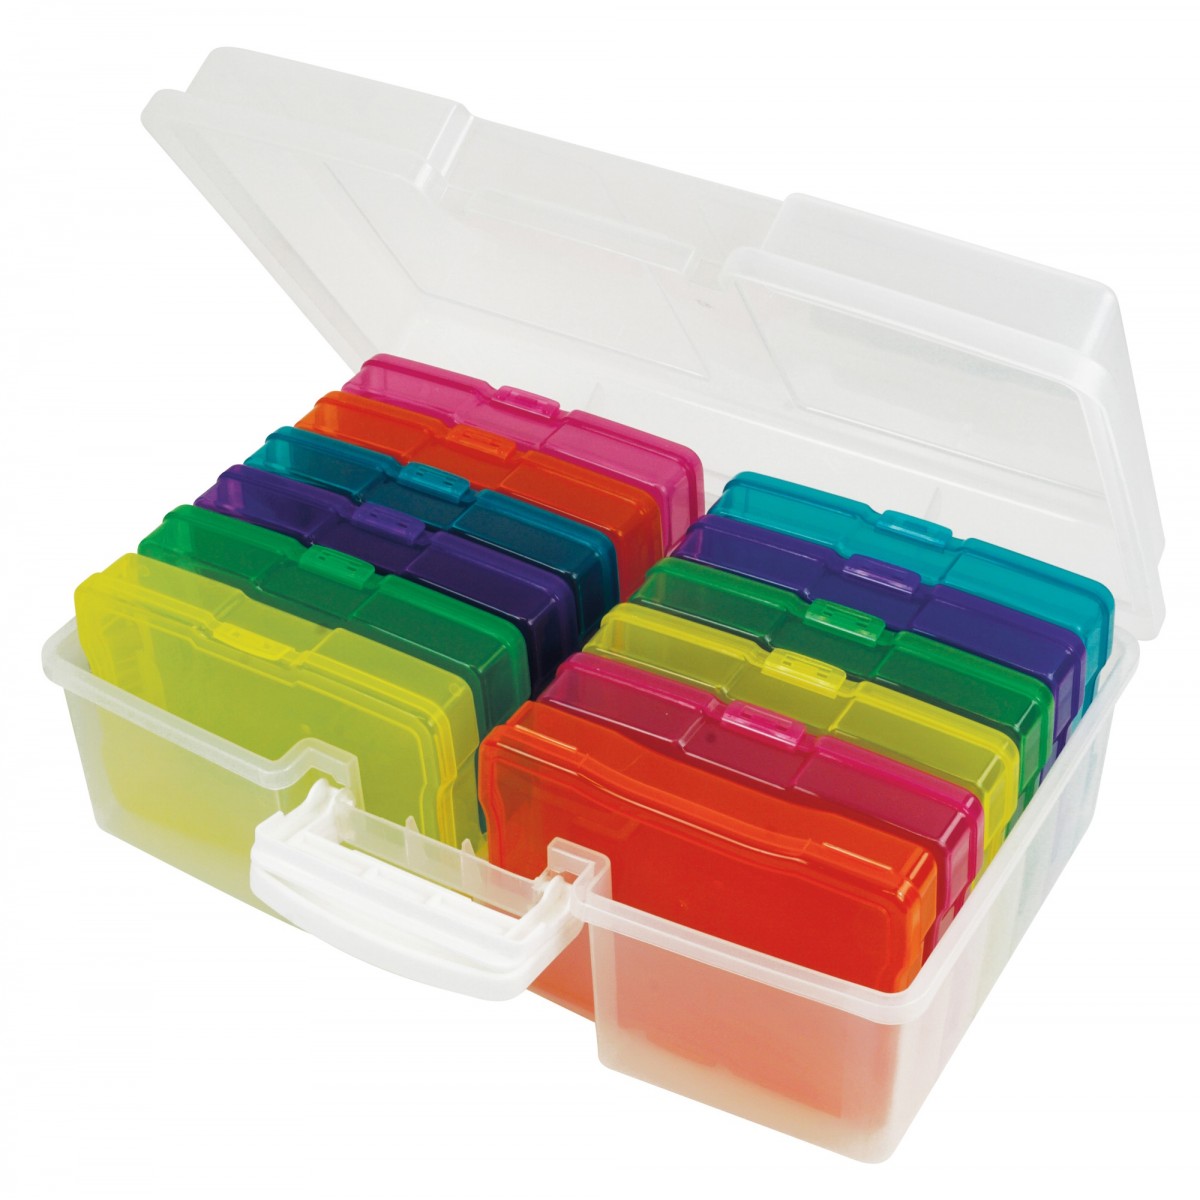 Color box in case: Transparent boxes for inclusive organization and storage